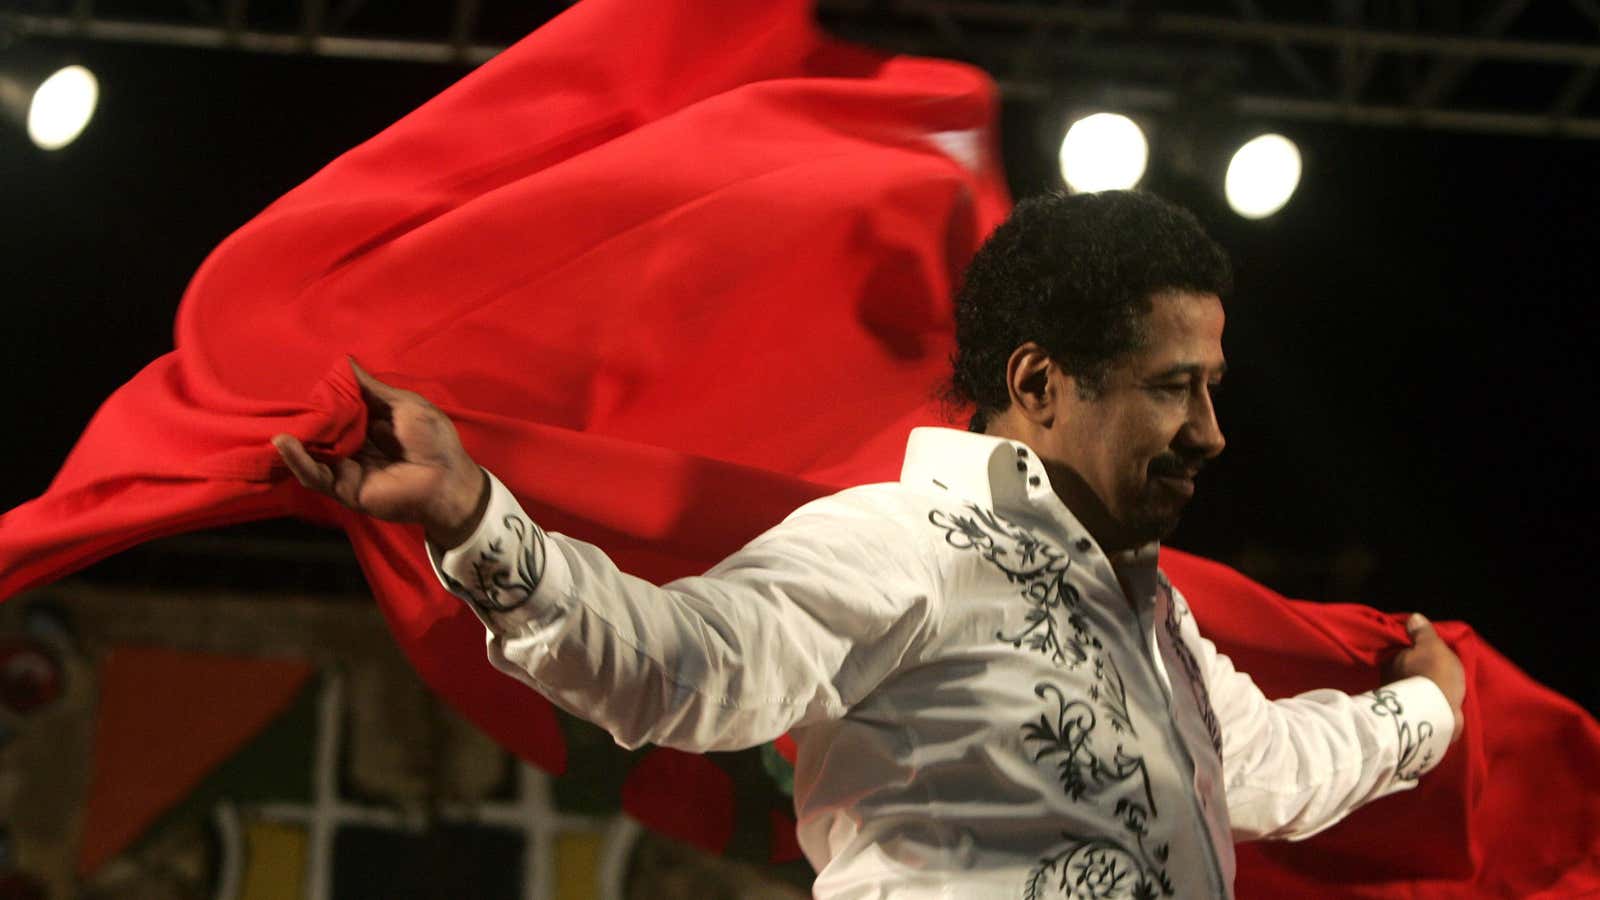 Algerian singer Cheb Khaled, often called King of Rai, covers himself with a Moroccan flag during a 2009 concert.